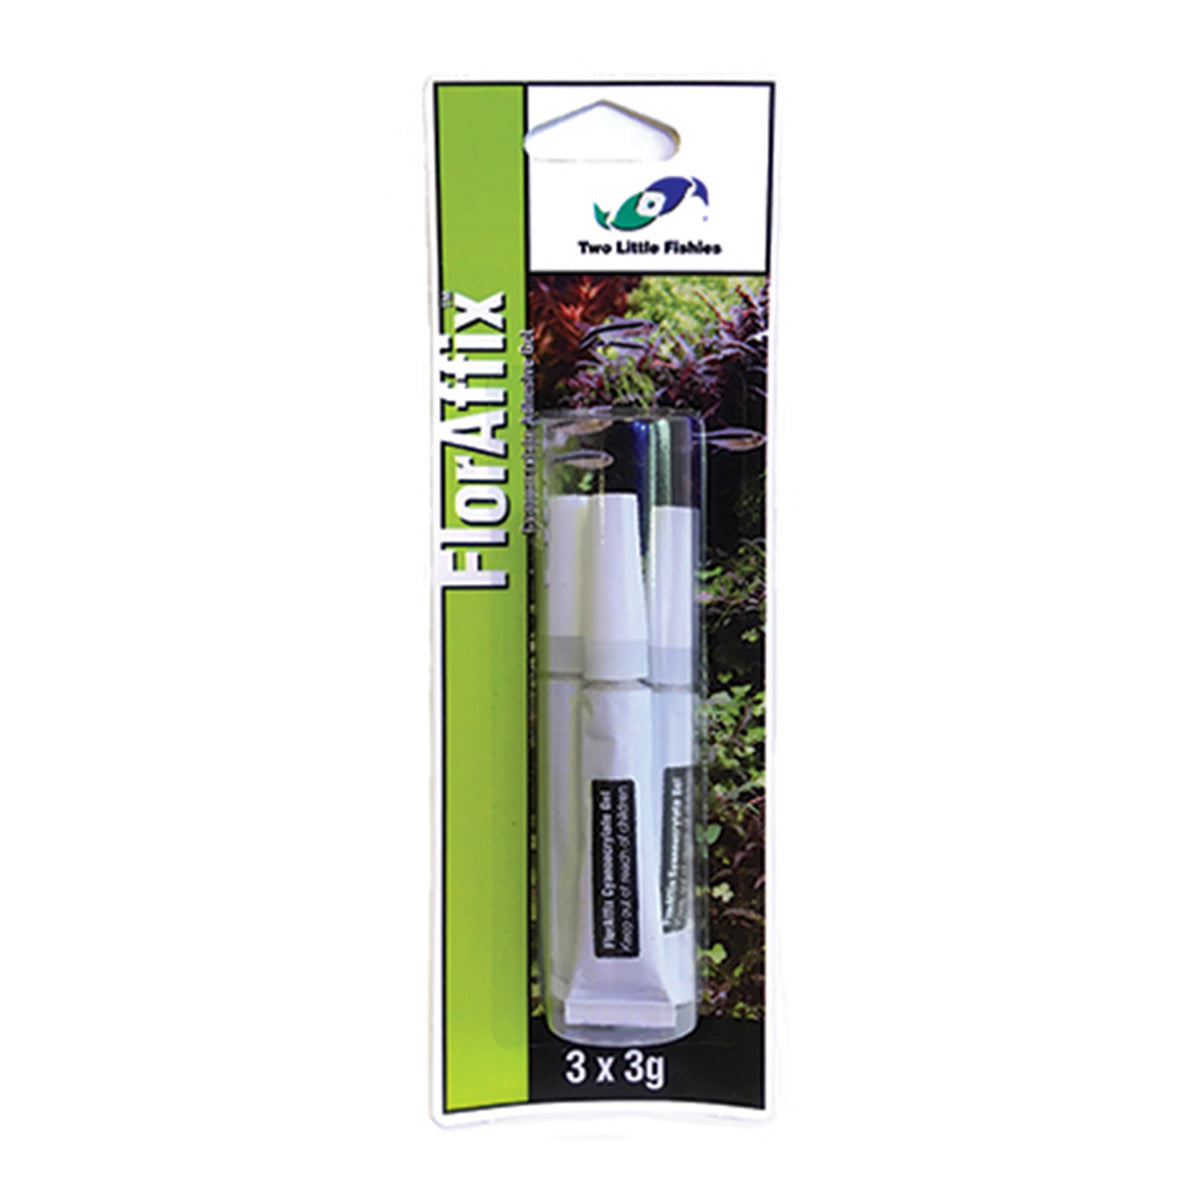 Two Little Fishies FlorAffix Plant Adhesive 3 x 3g